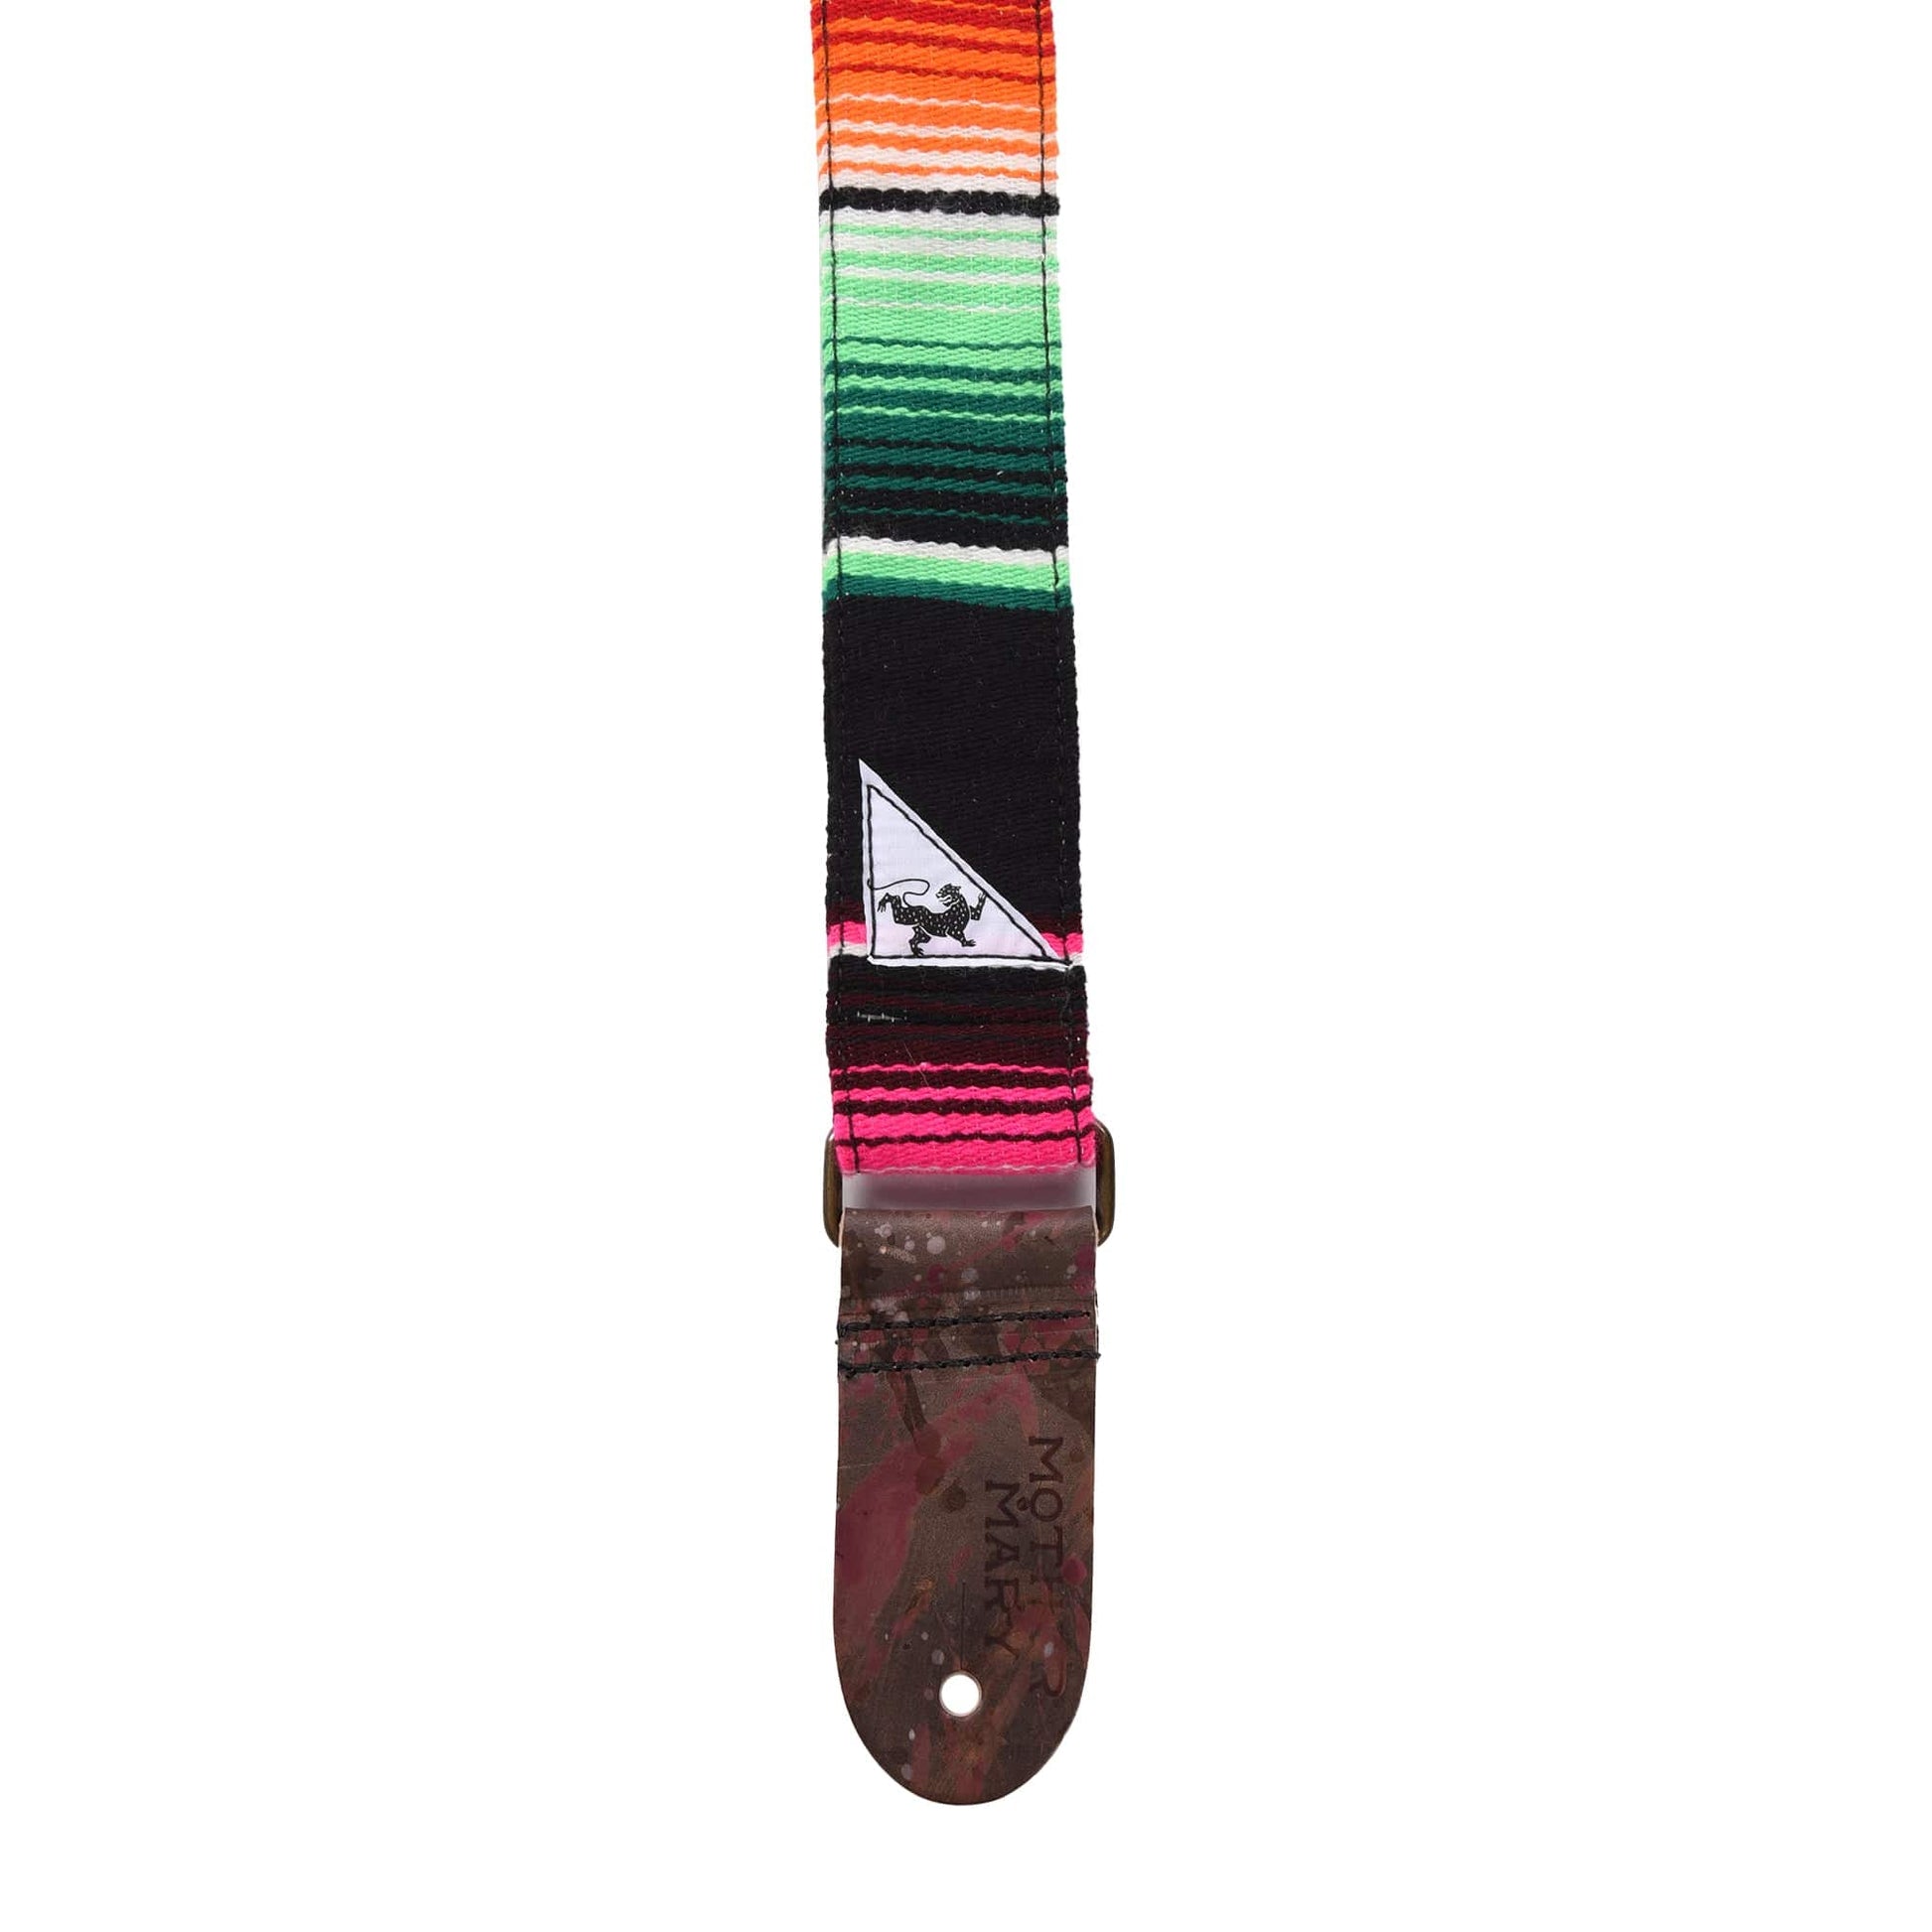 Mother Mary Black Serape Mexican Blanket Guitar Strap Accessories / Straps